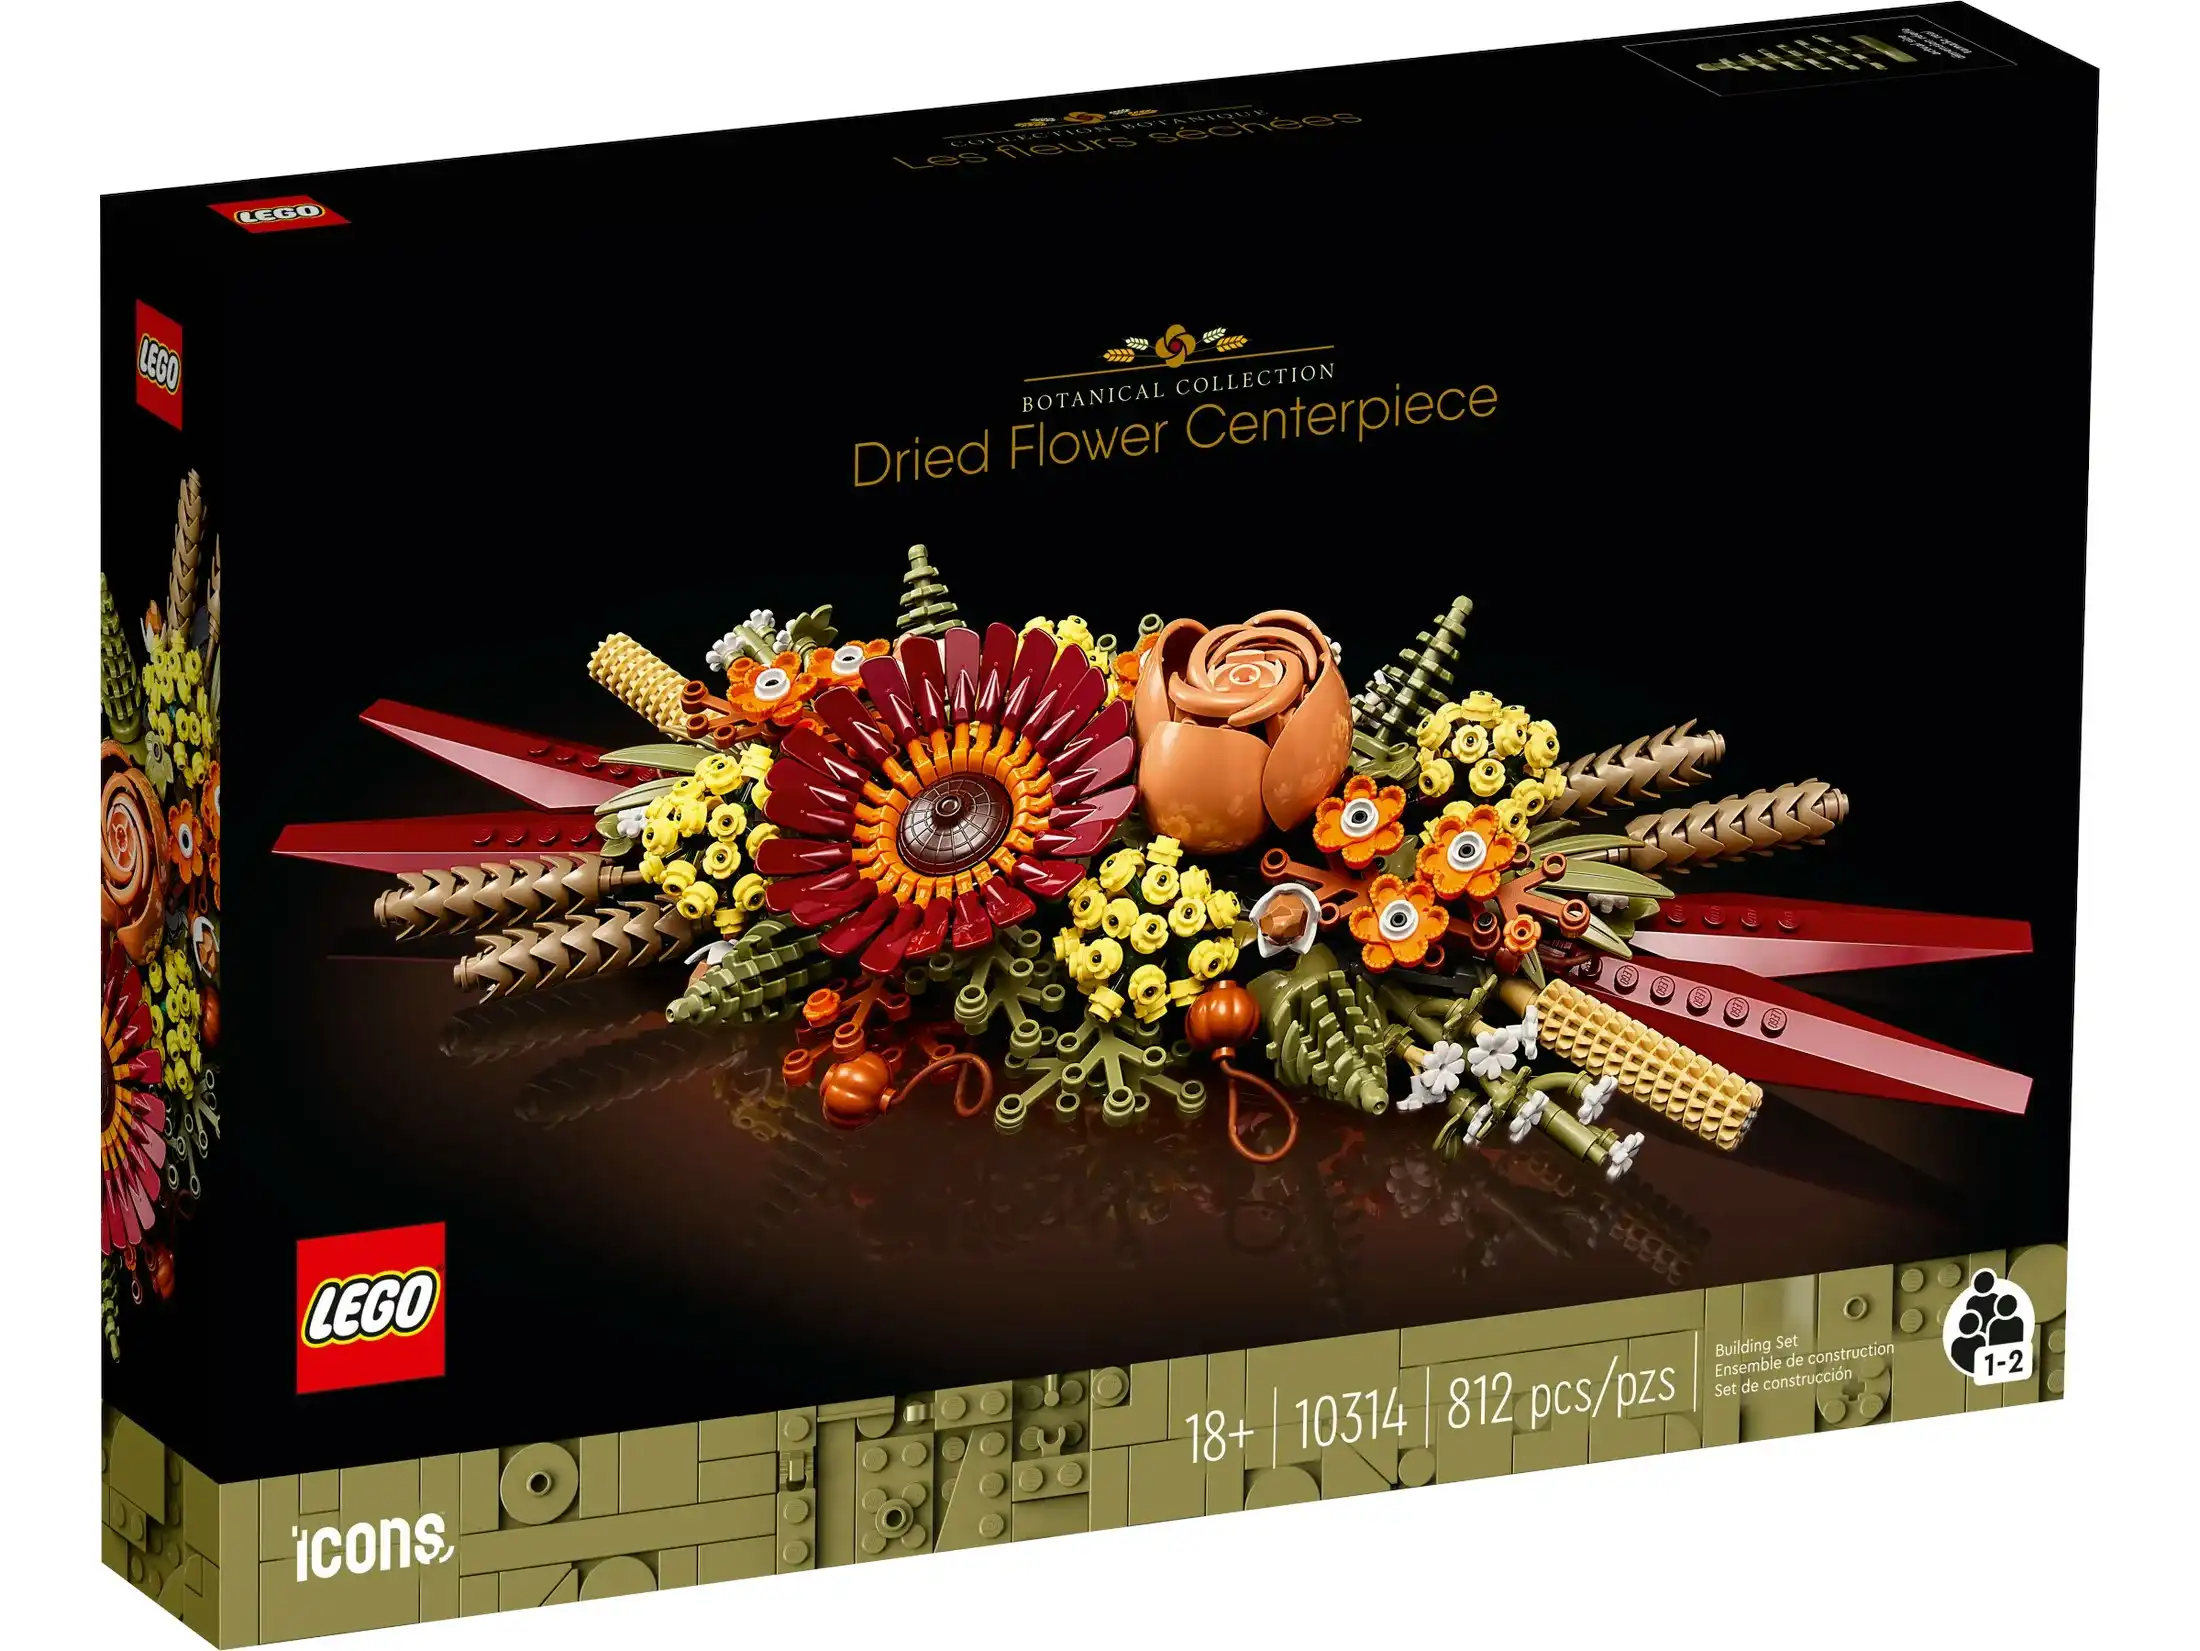 LEGO 10314 Dried Flower Centerpiece - Icons